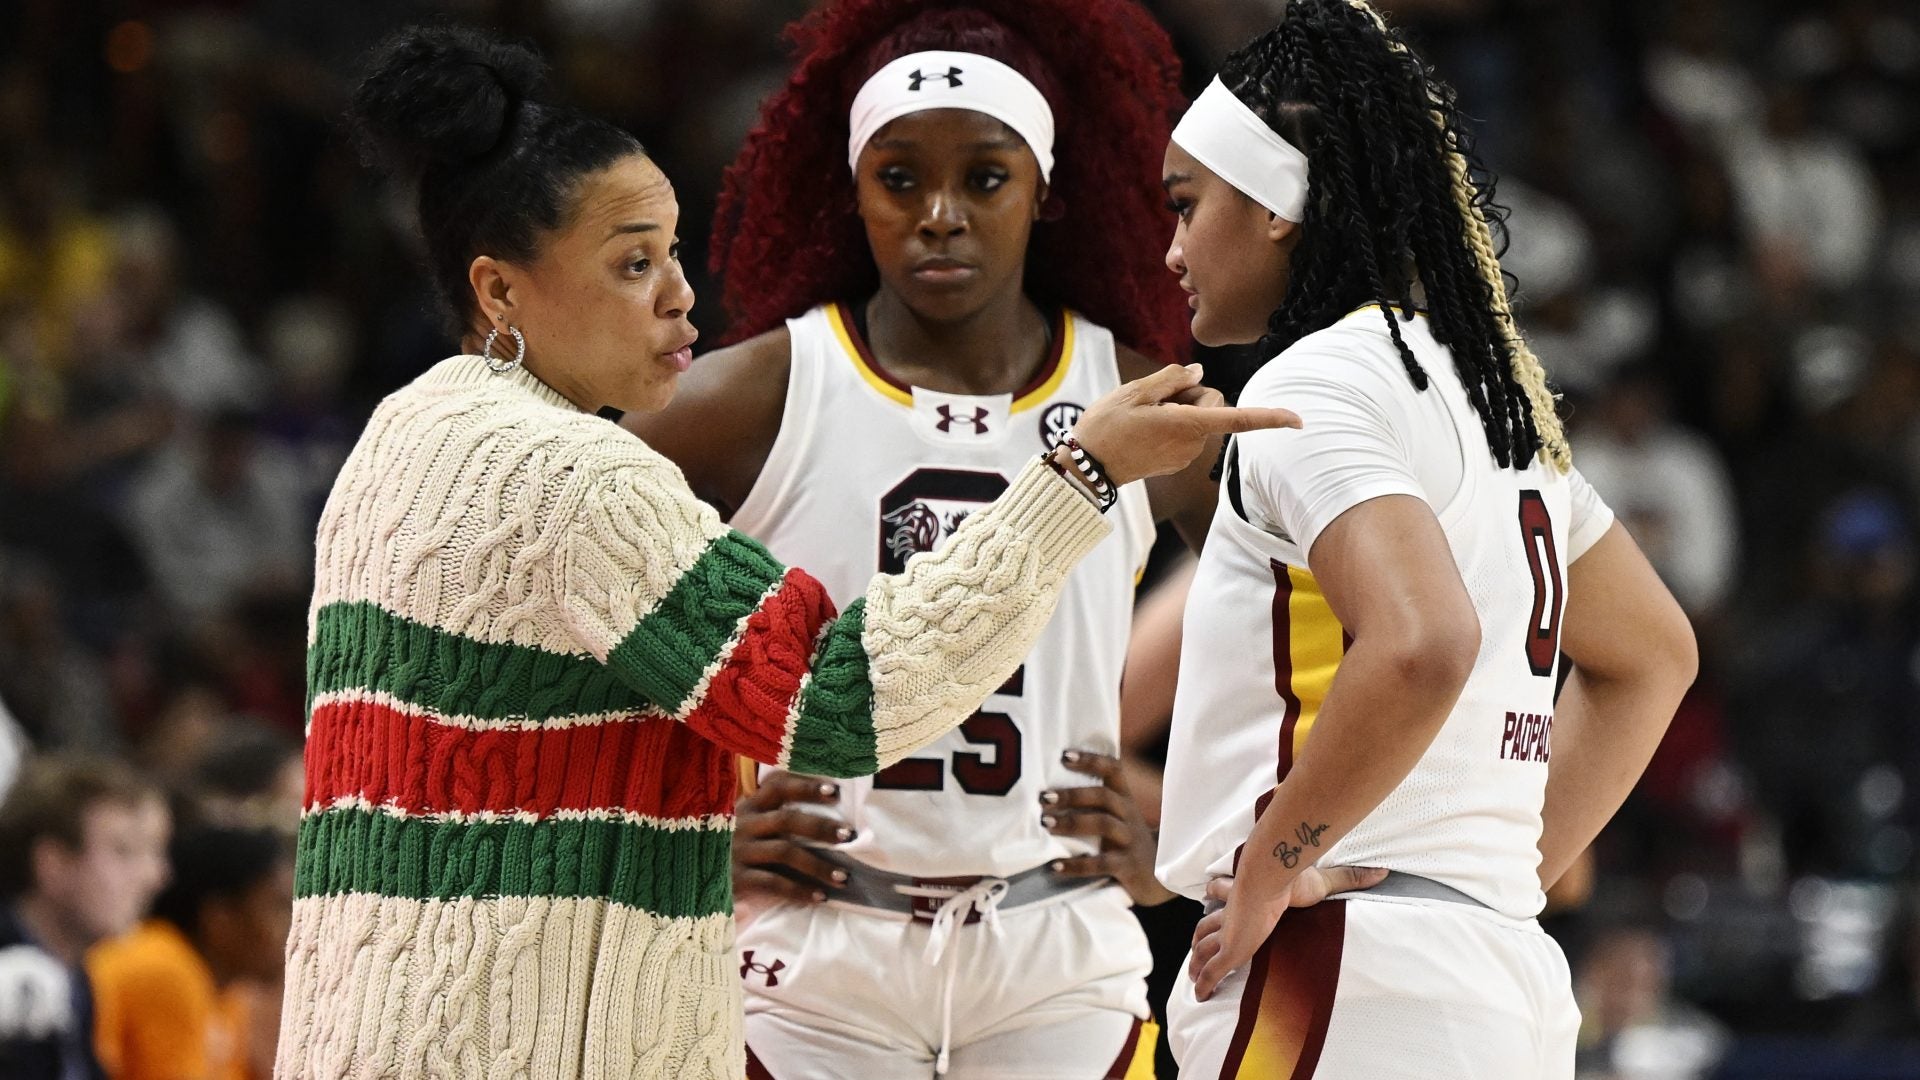 A Closer Look At The Designer Looks Of Dawn Staley The NCAA’s Flyest Coach